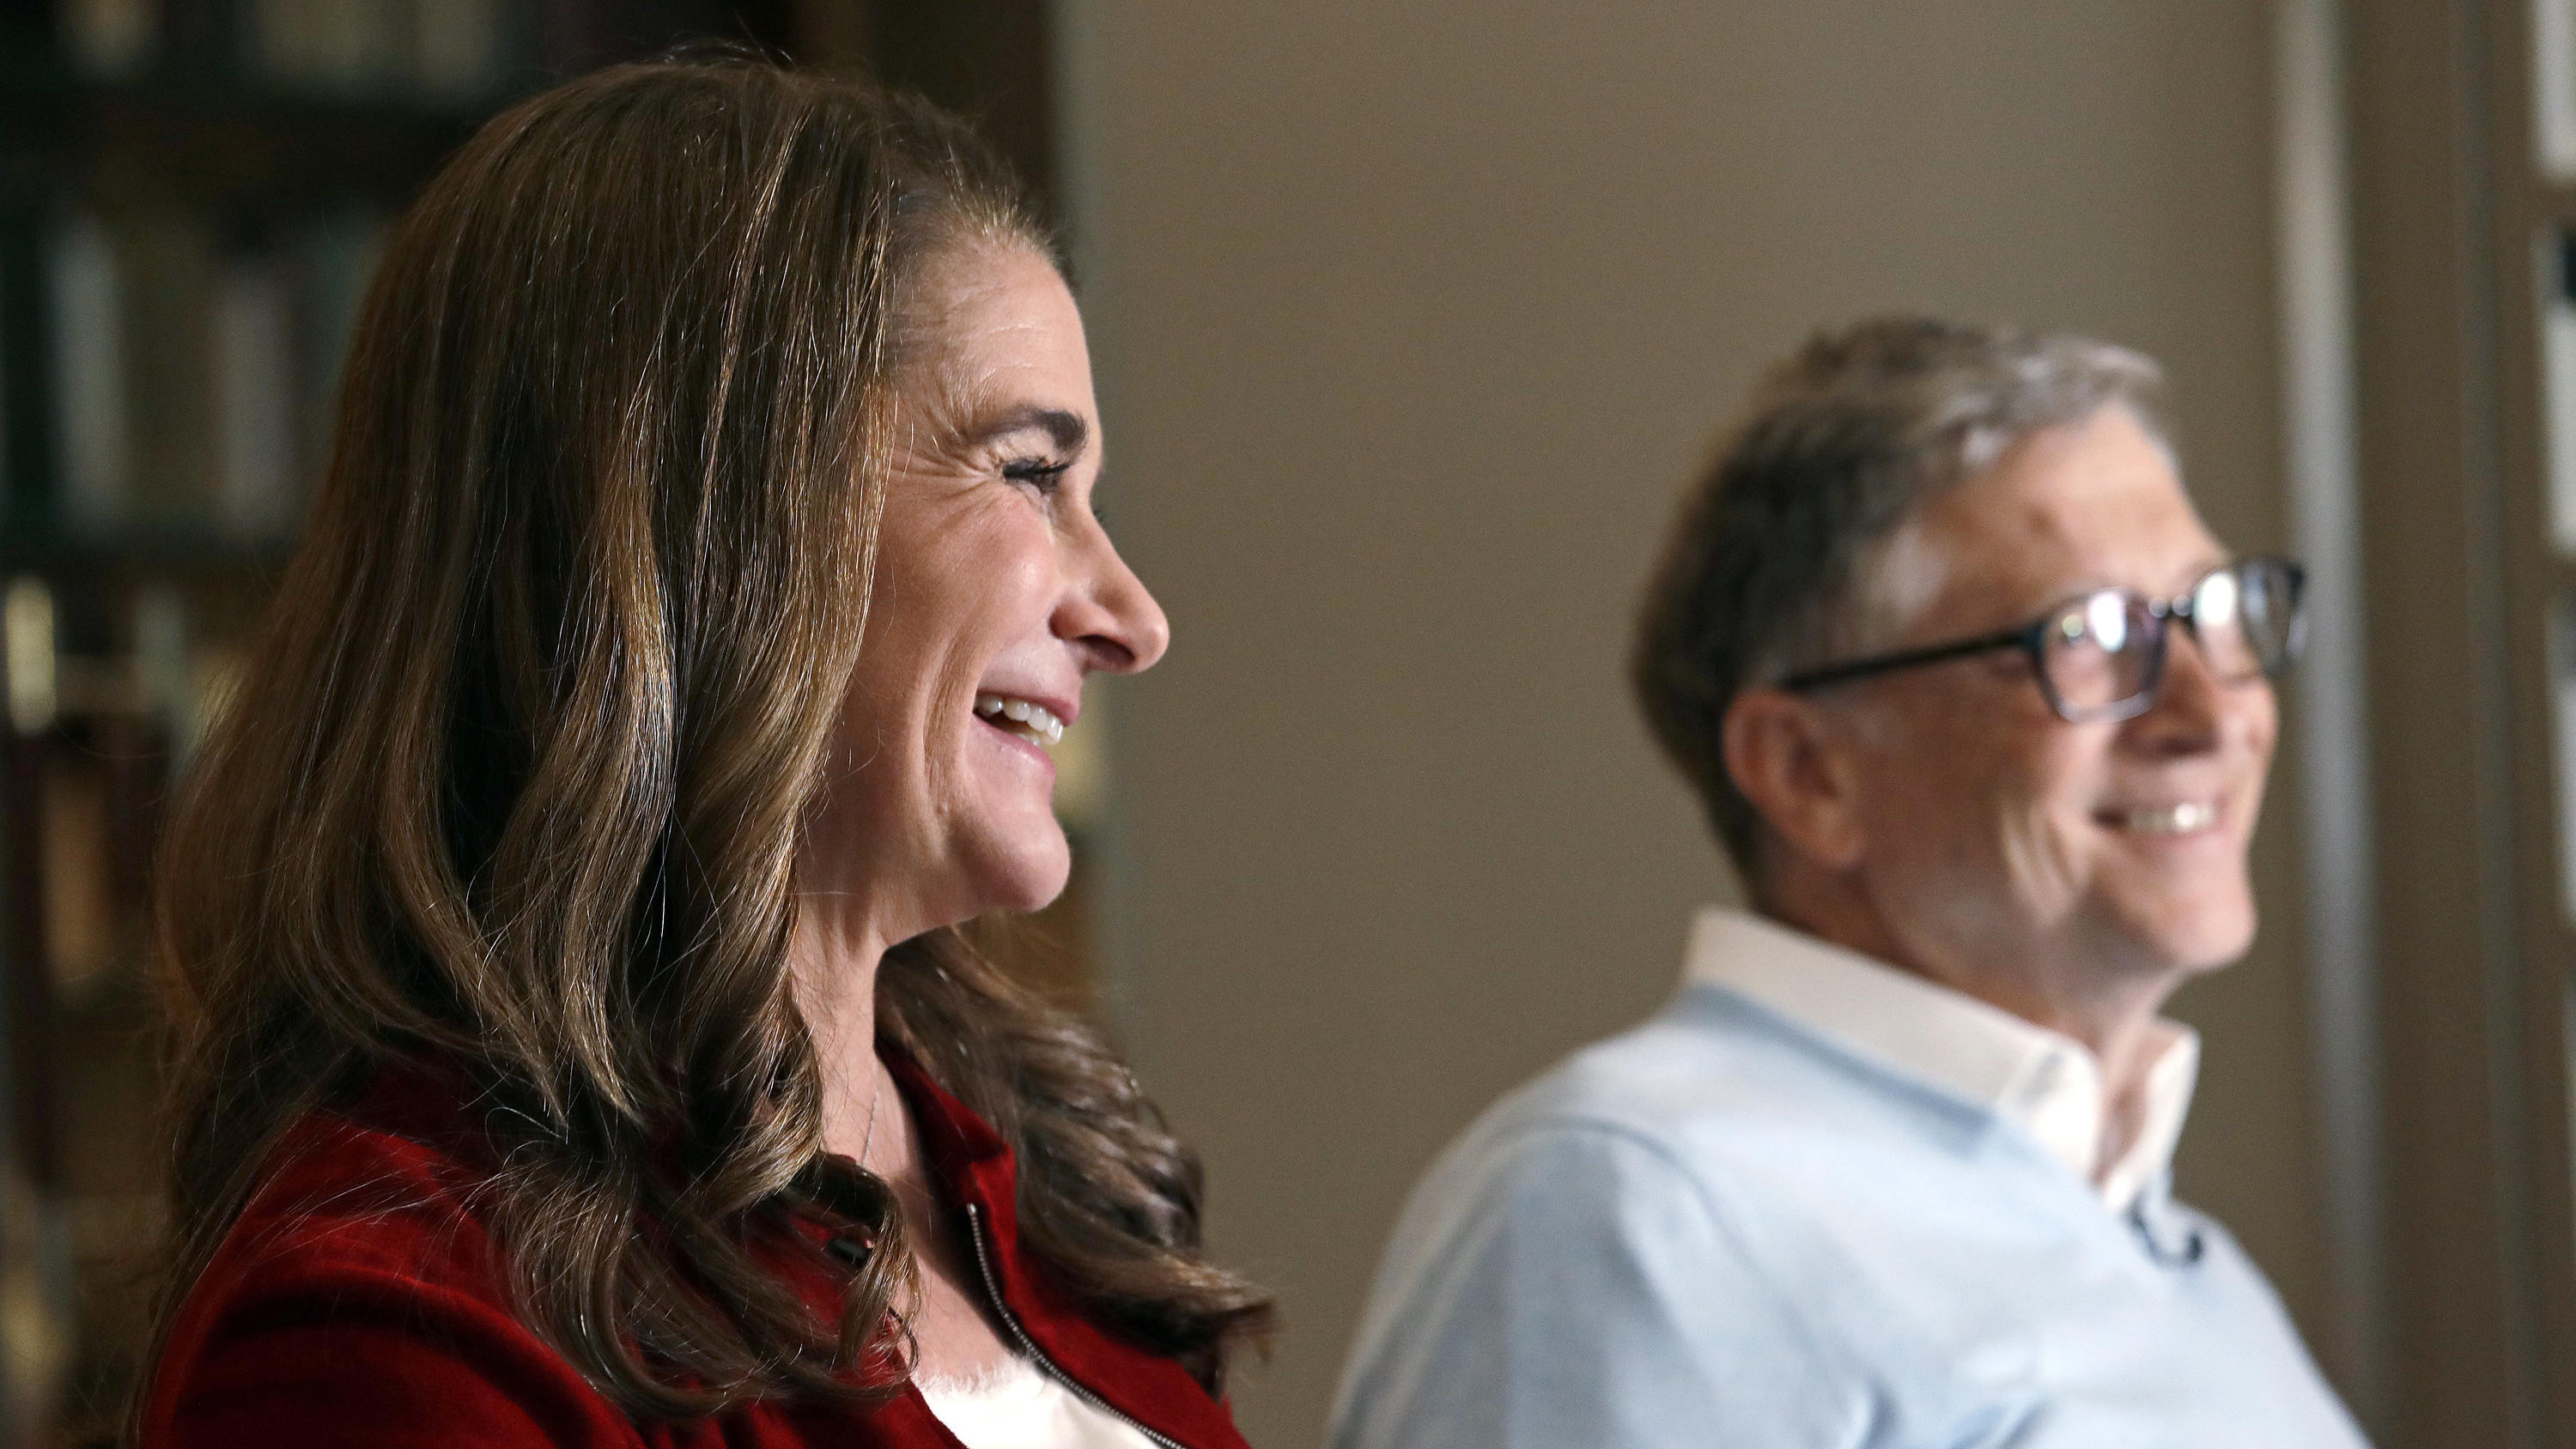 In this photo taken Feb. 1, 2019, Bill and Melinda Gates are interviewed in Kirkland, Wash. Bill Gates and Melinda French Gates will continue their work with the Giving Pledge, but, following their divorce earlier this year, they will do it separatel